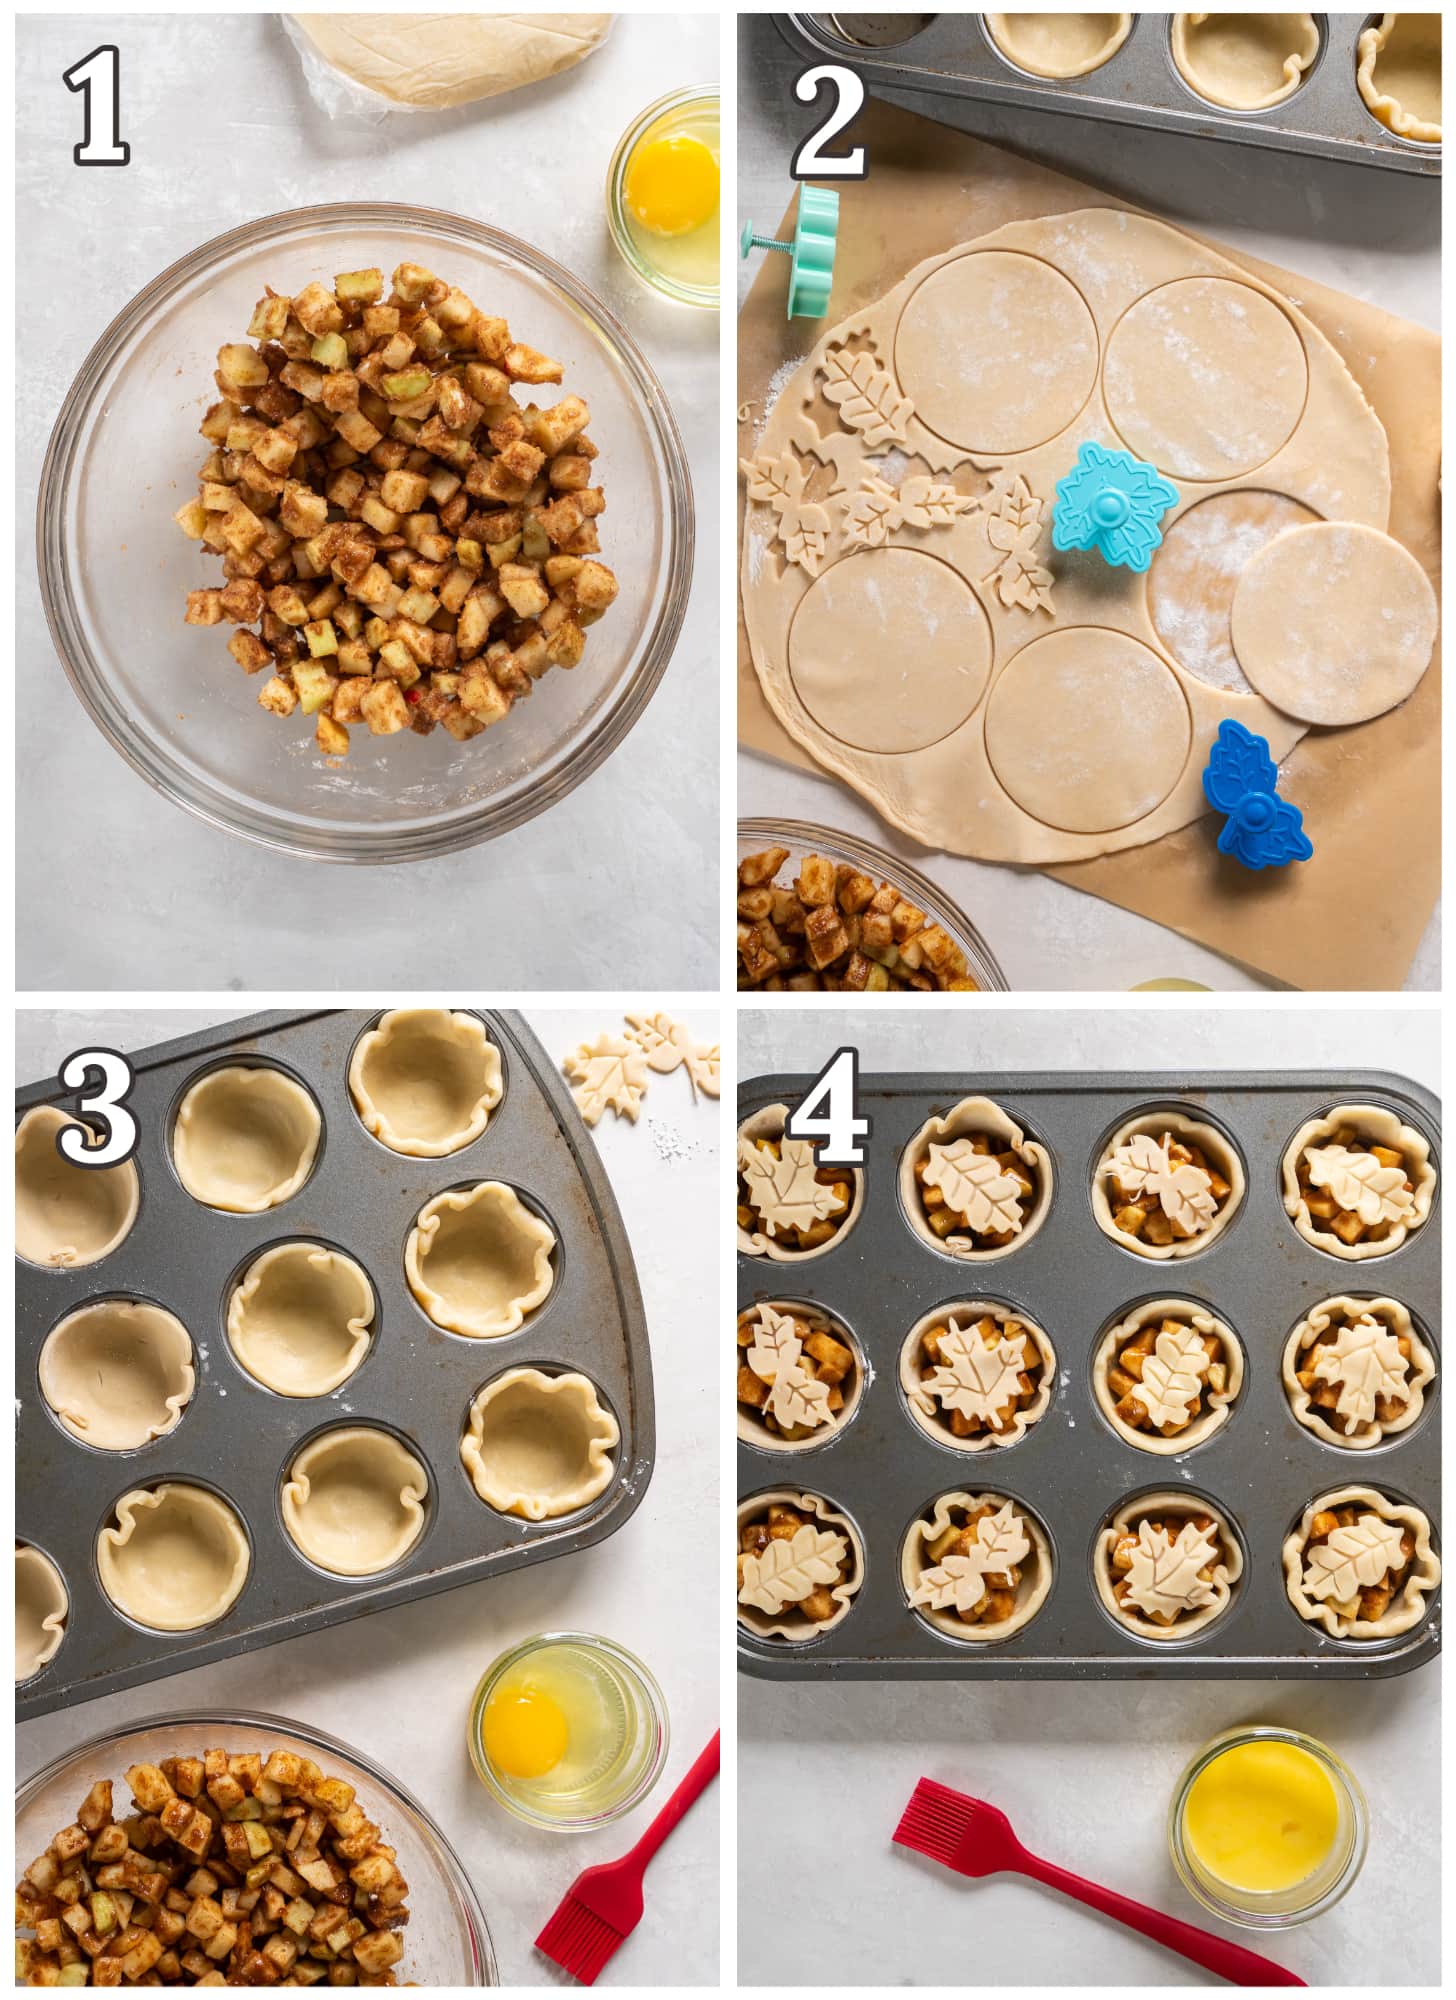 https://www.ifyougiveablondeakitchen.com/wp-content/uploads/2022/09/how-to-make-mini-apple-pies-in-a-muffin-tin.jpg